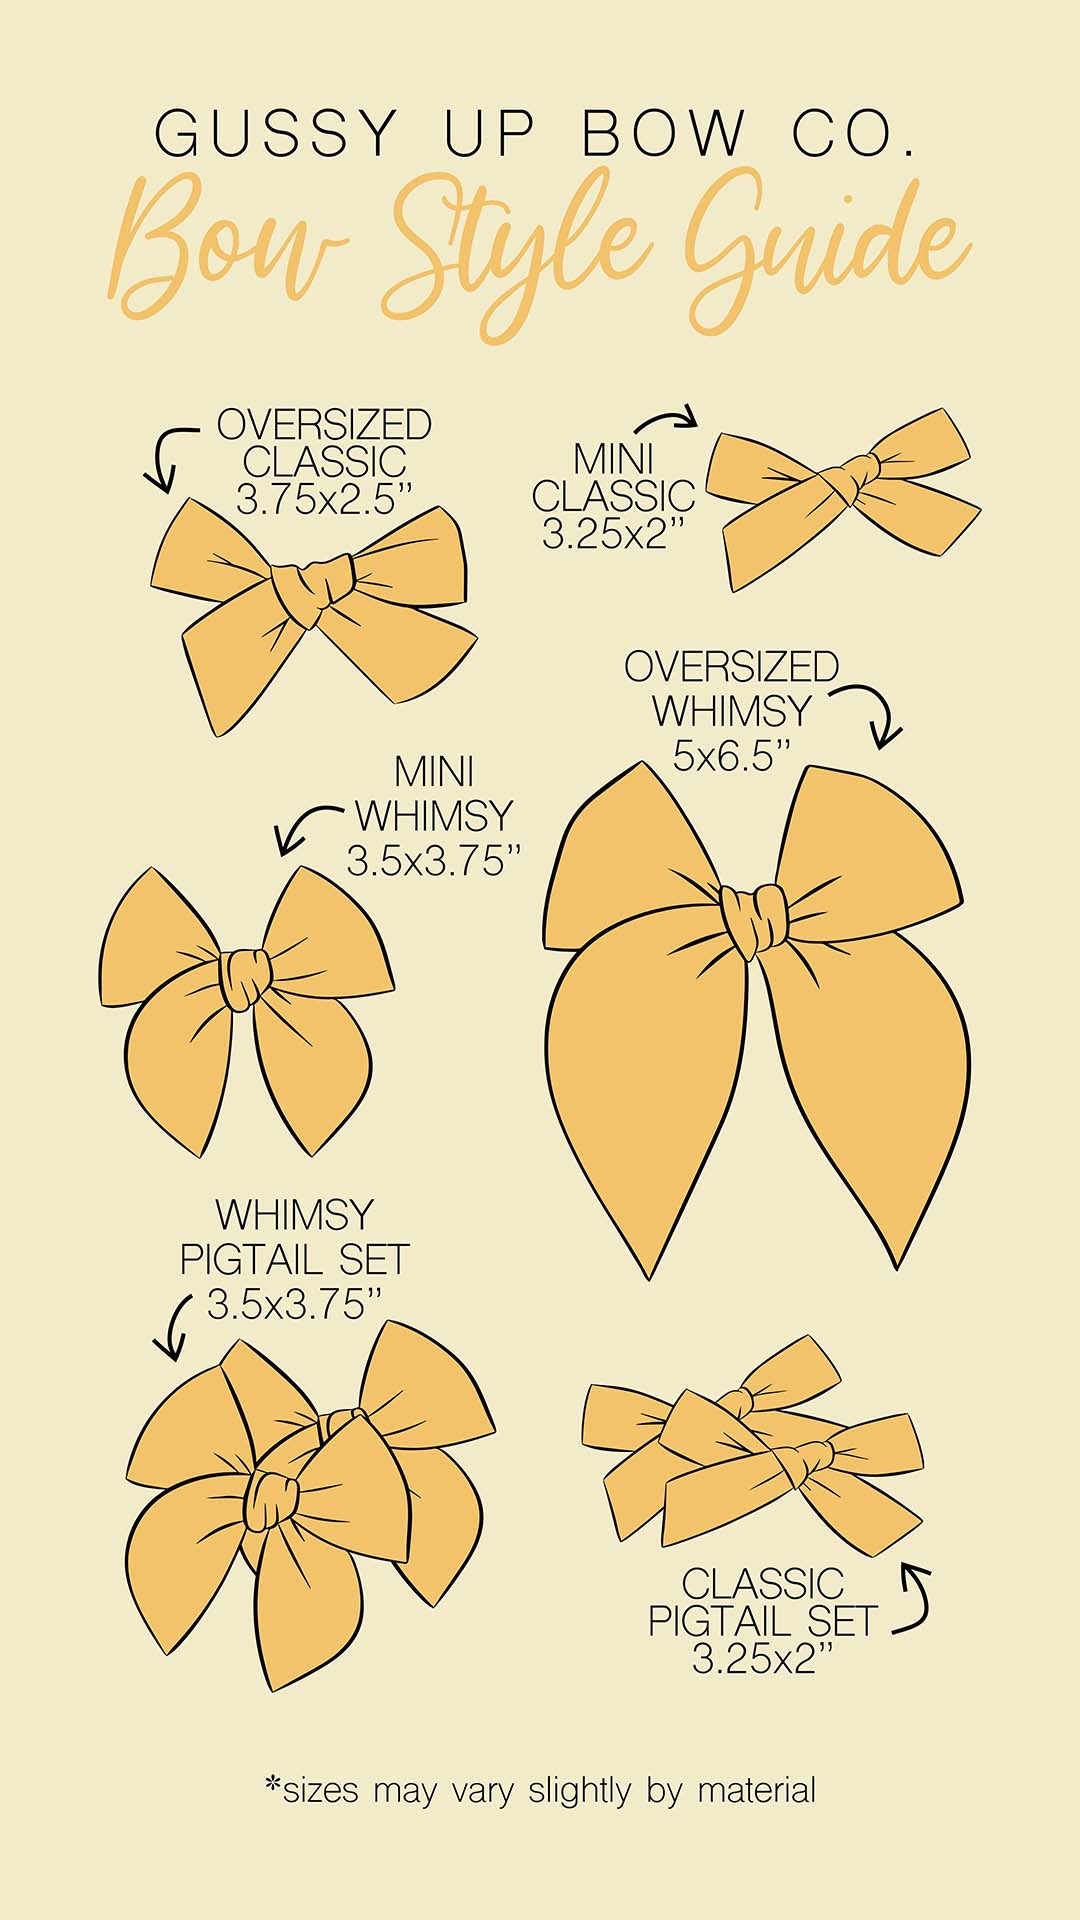 Mabel Floral | Whimsy Bow